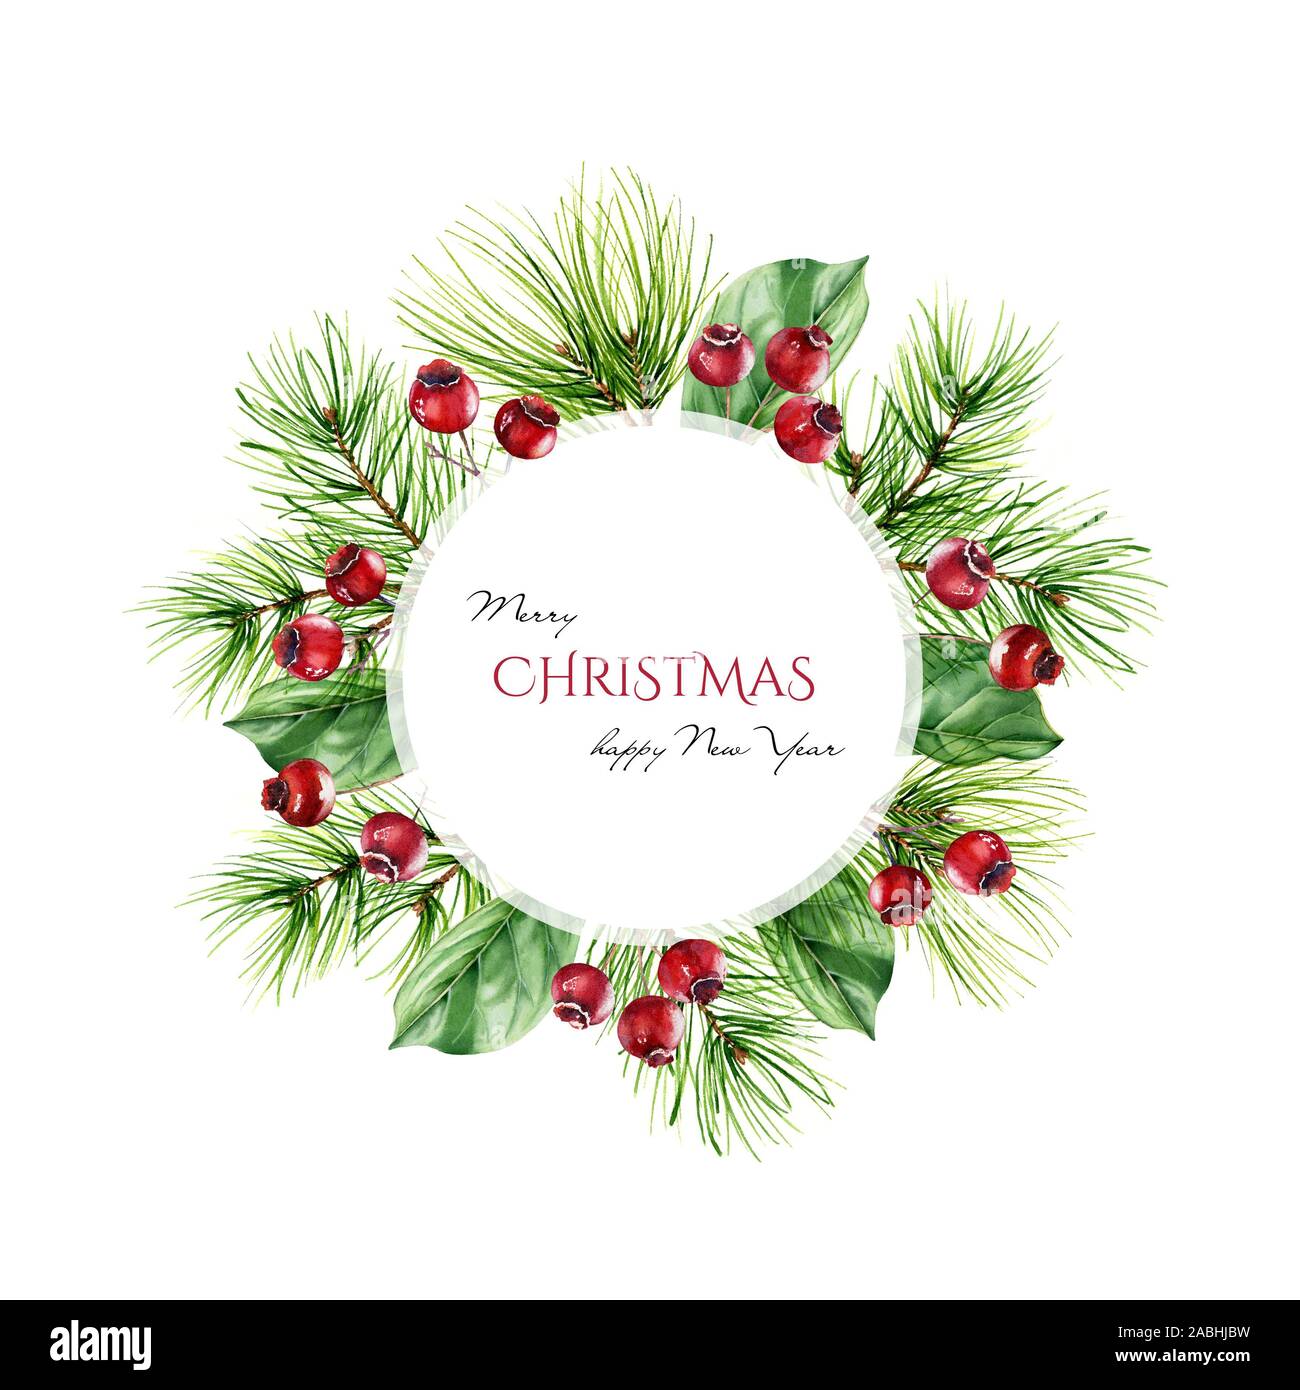 Round Christmas Frame With Pine Branches Red Berries And Place For Text Watercolor Illustration For Greeting Cards Banners Invitations Calendars Stock Photo Alamy